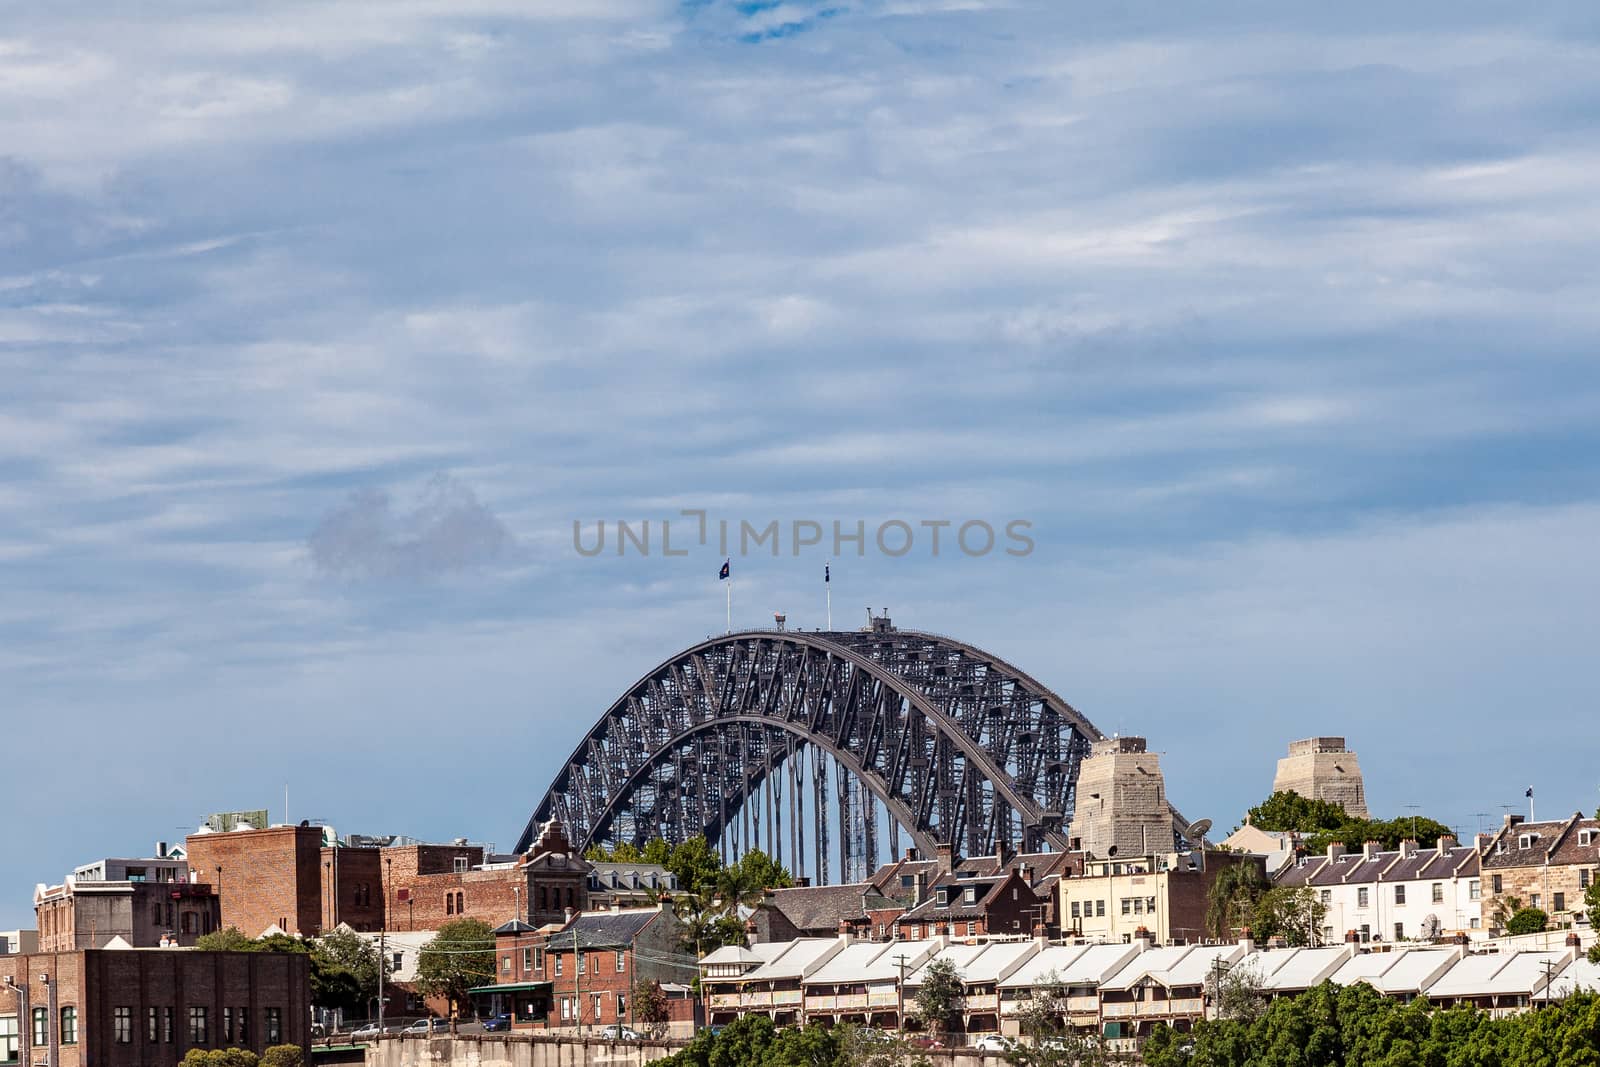 Sydney Harbour a view of the bridge rising above the surrounding buildings by kgboxford